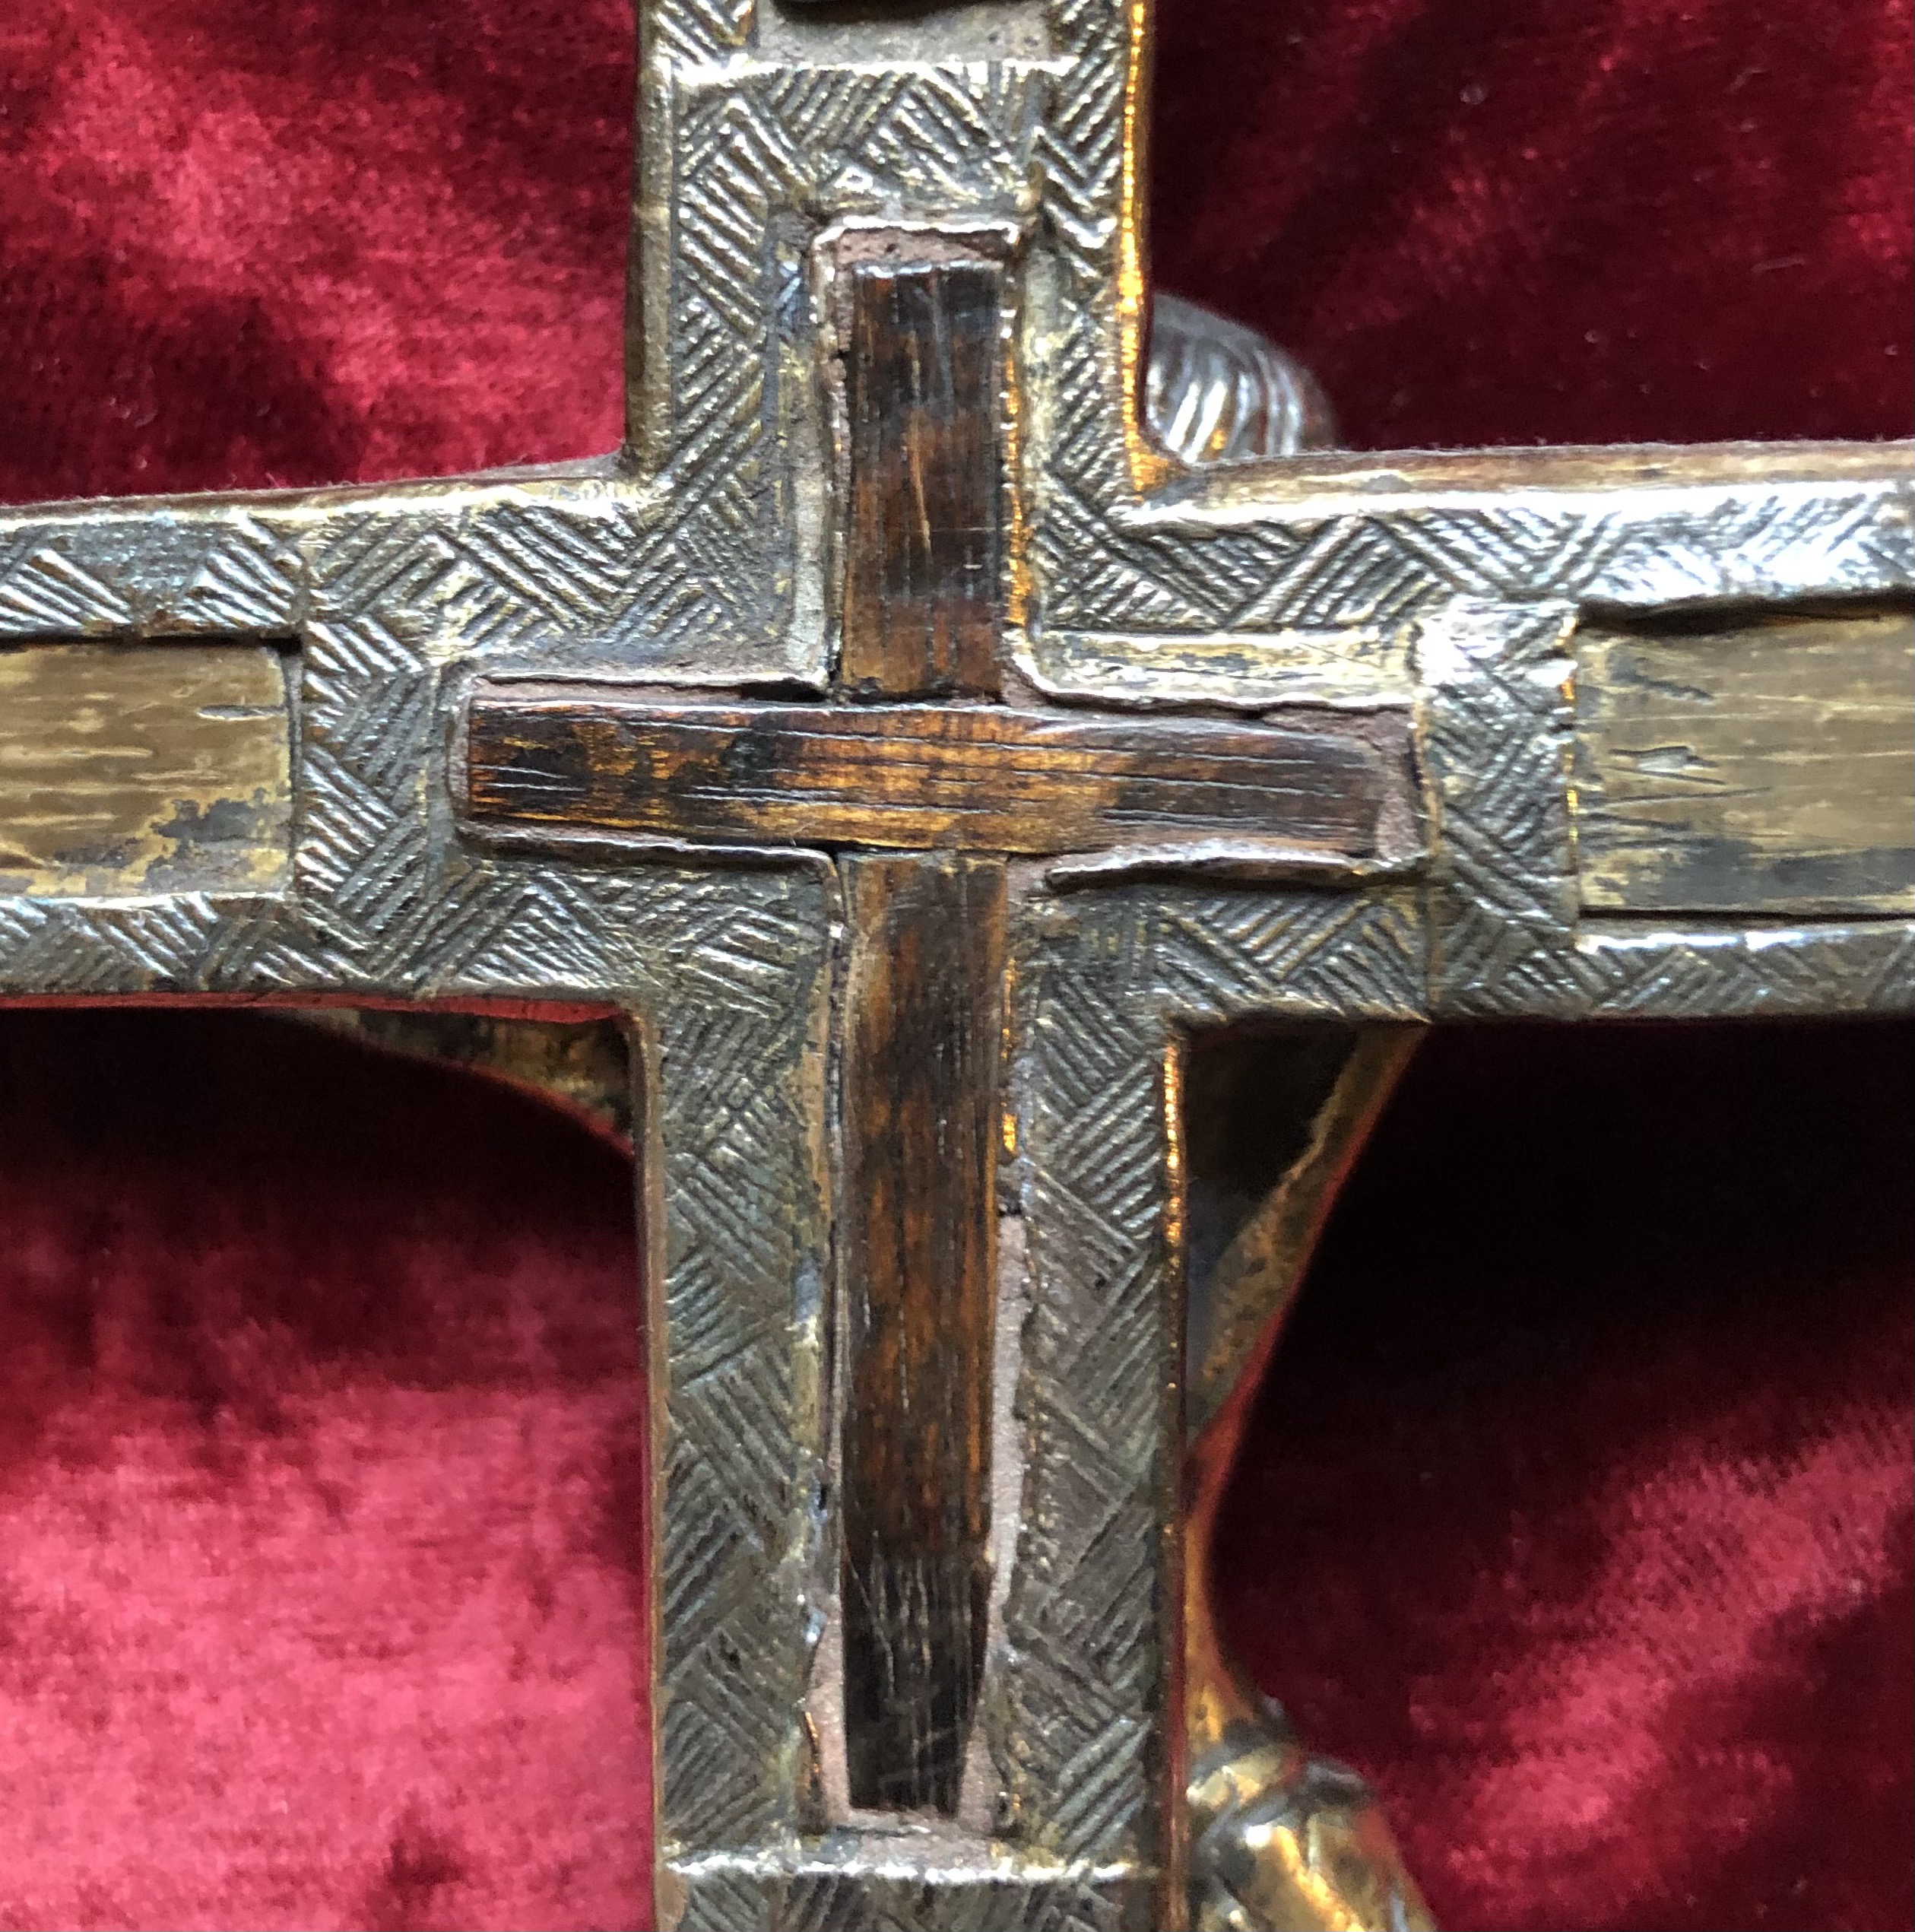 Why we can have faith in relics of the True Cross, whatever their true age